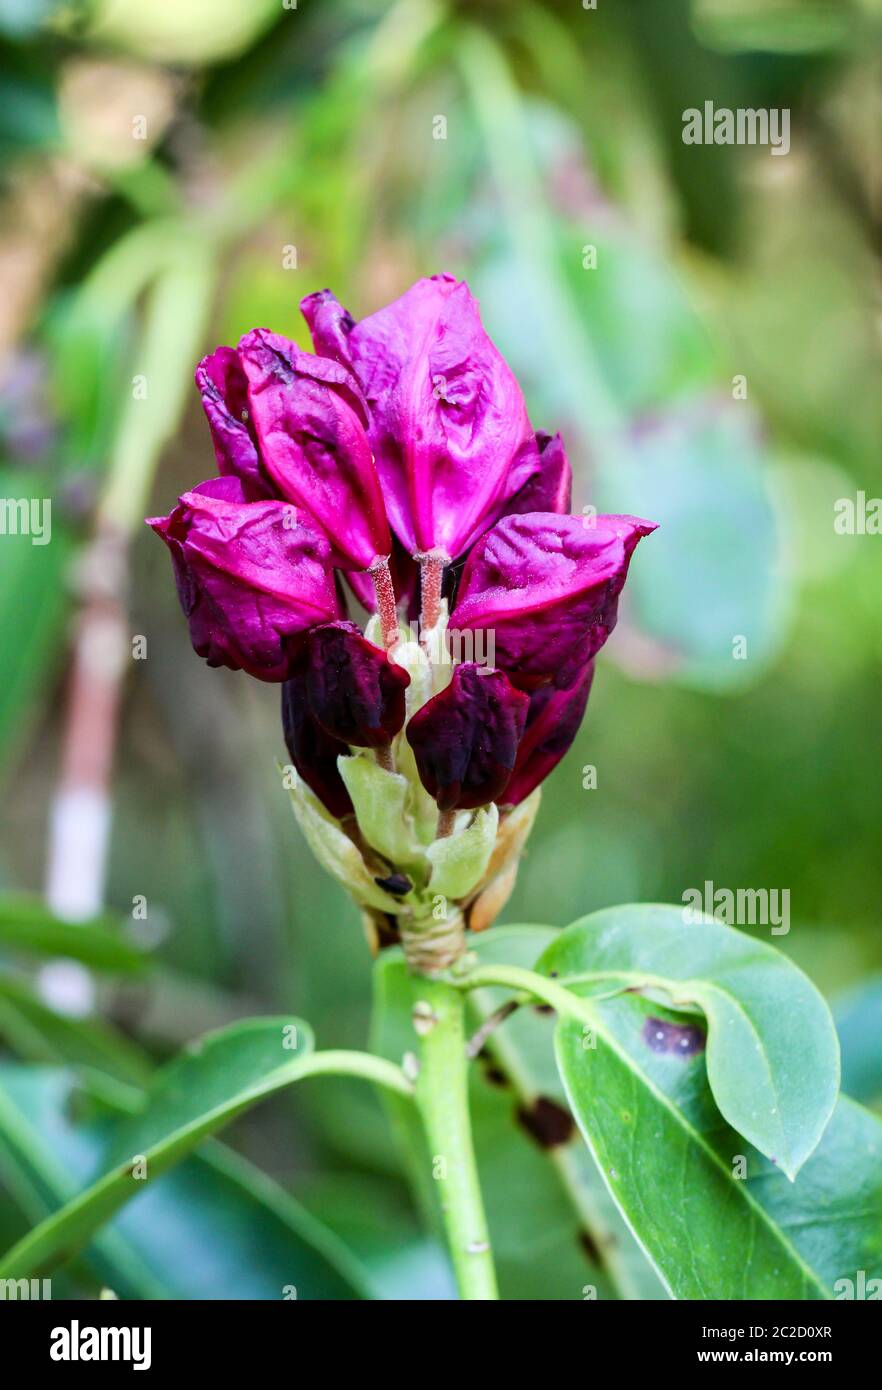 close up of purple flowers of rhododendron Stock Photo